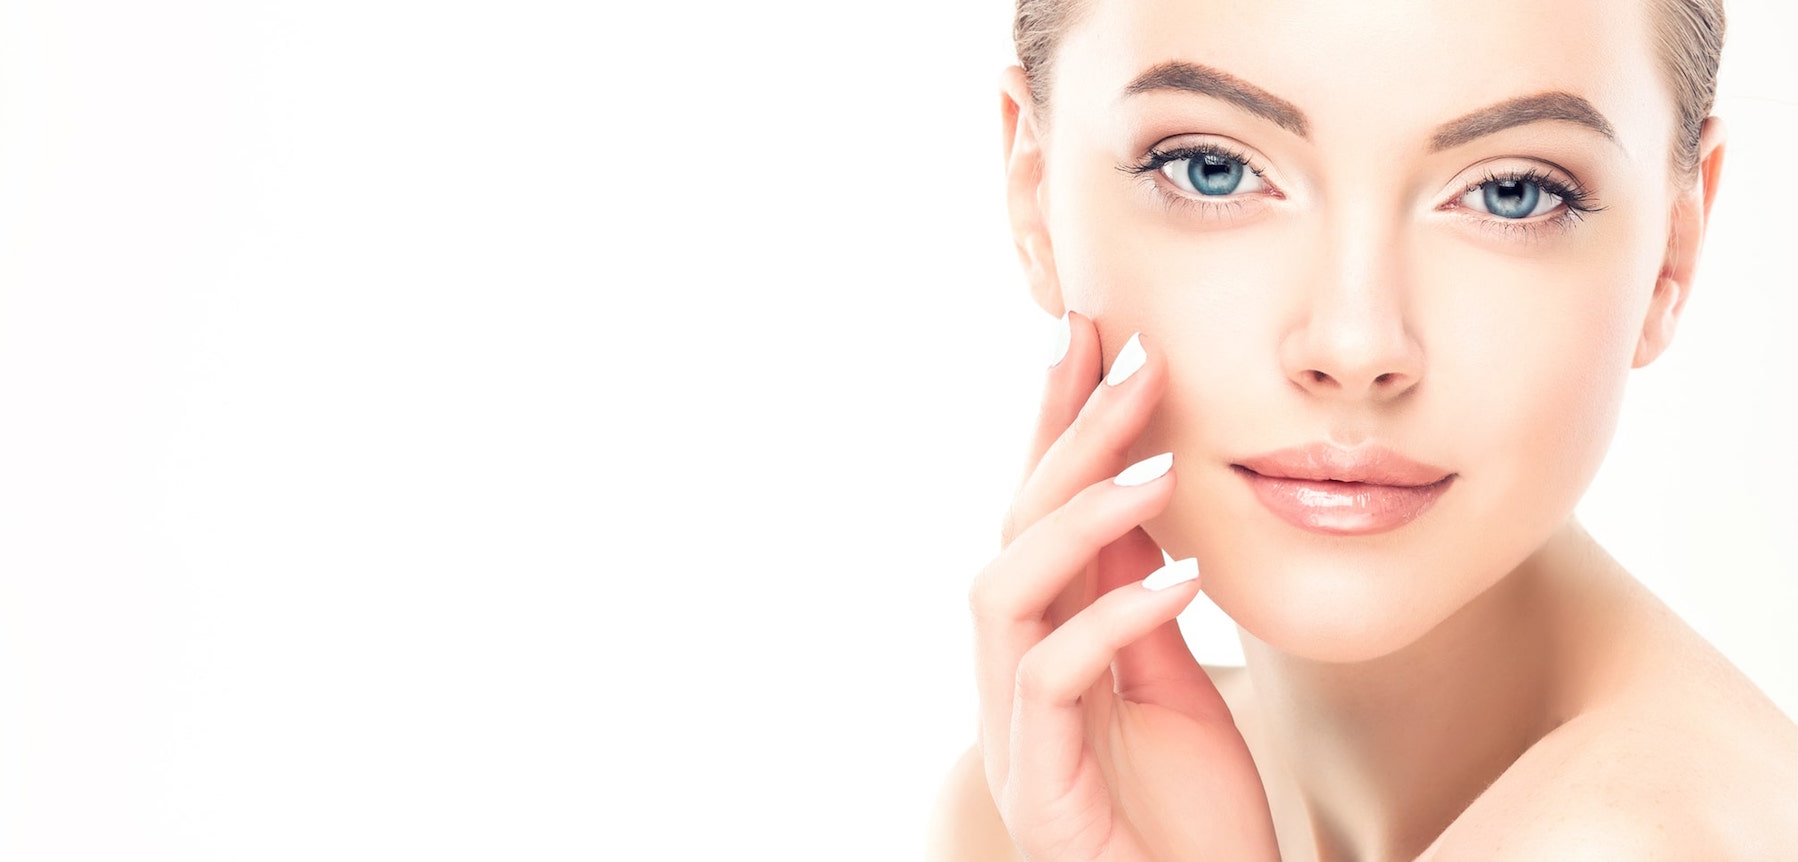 Discover the reasons why cosmetic surgery is so popular